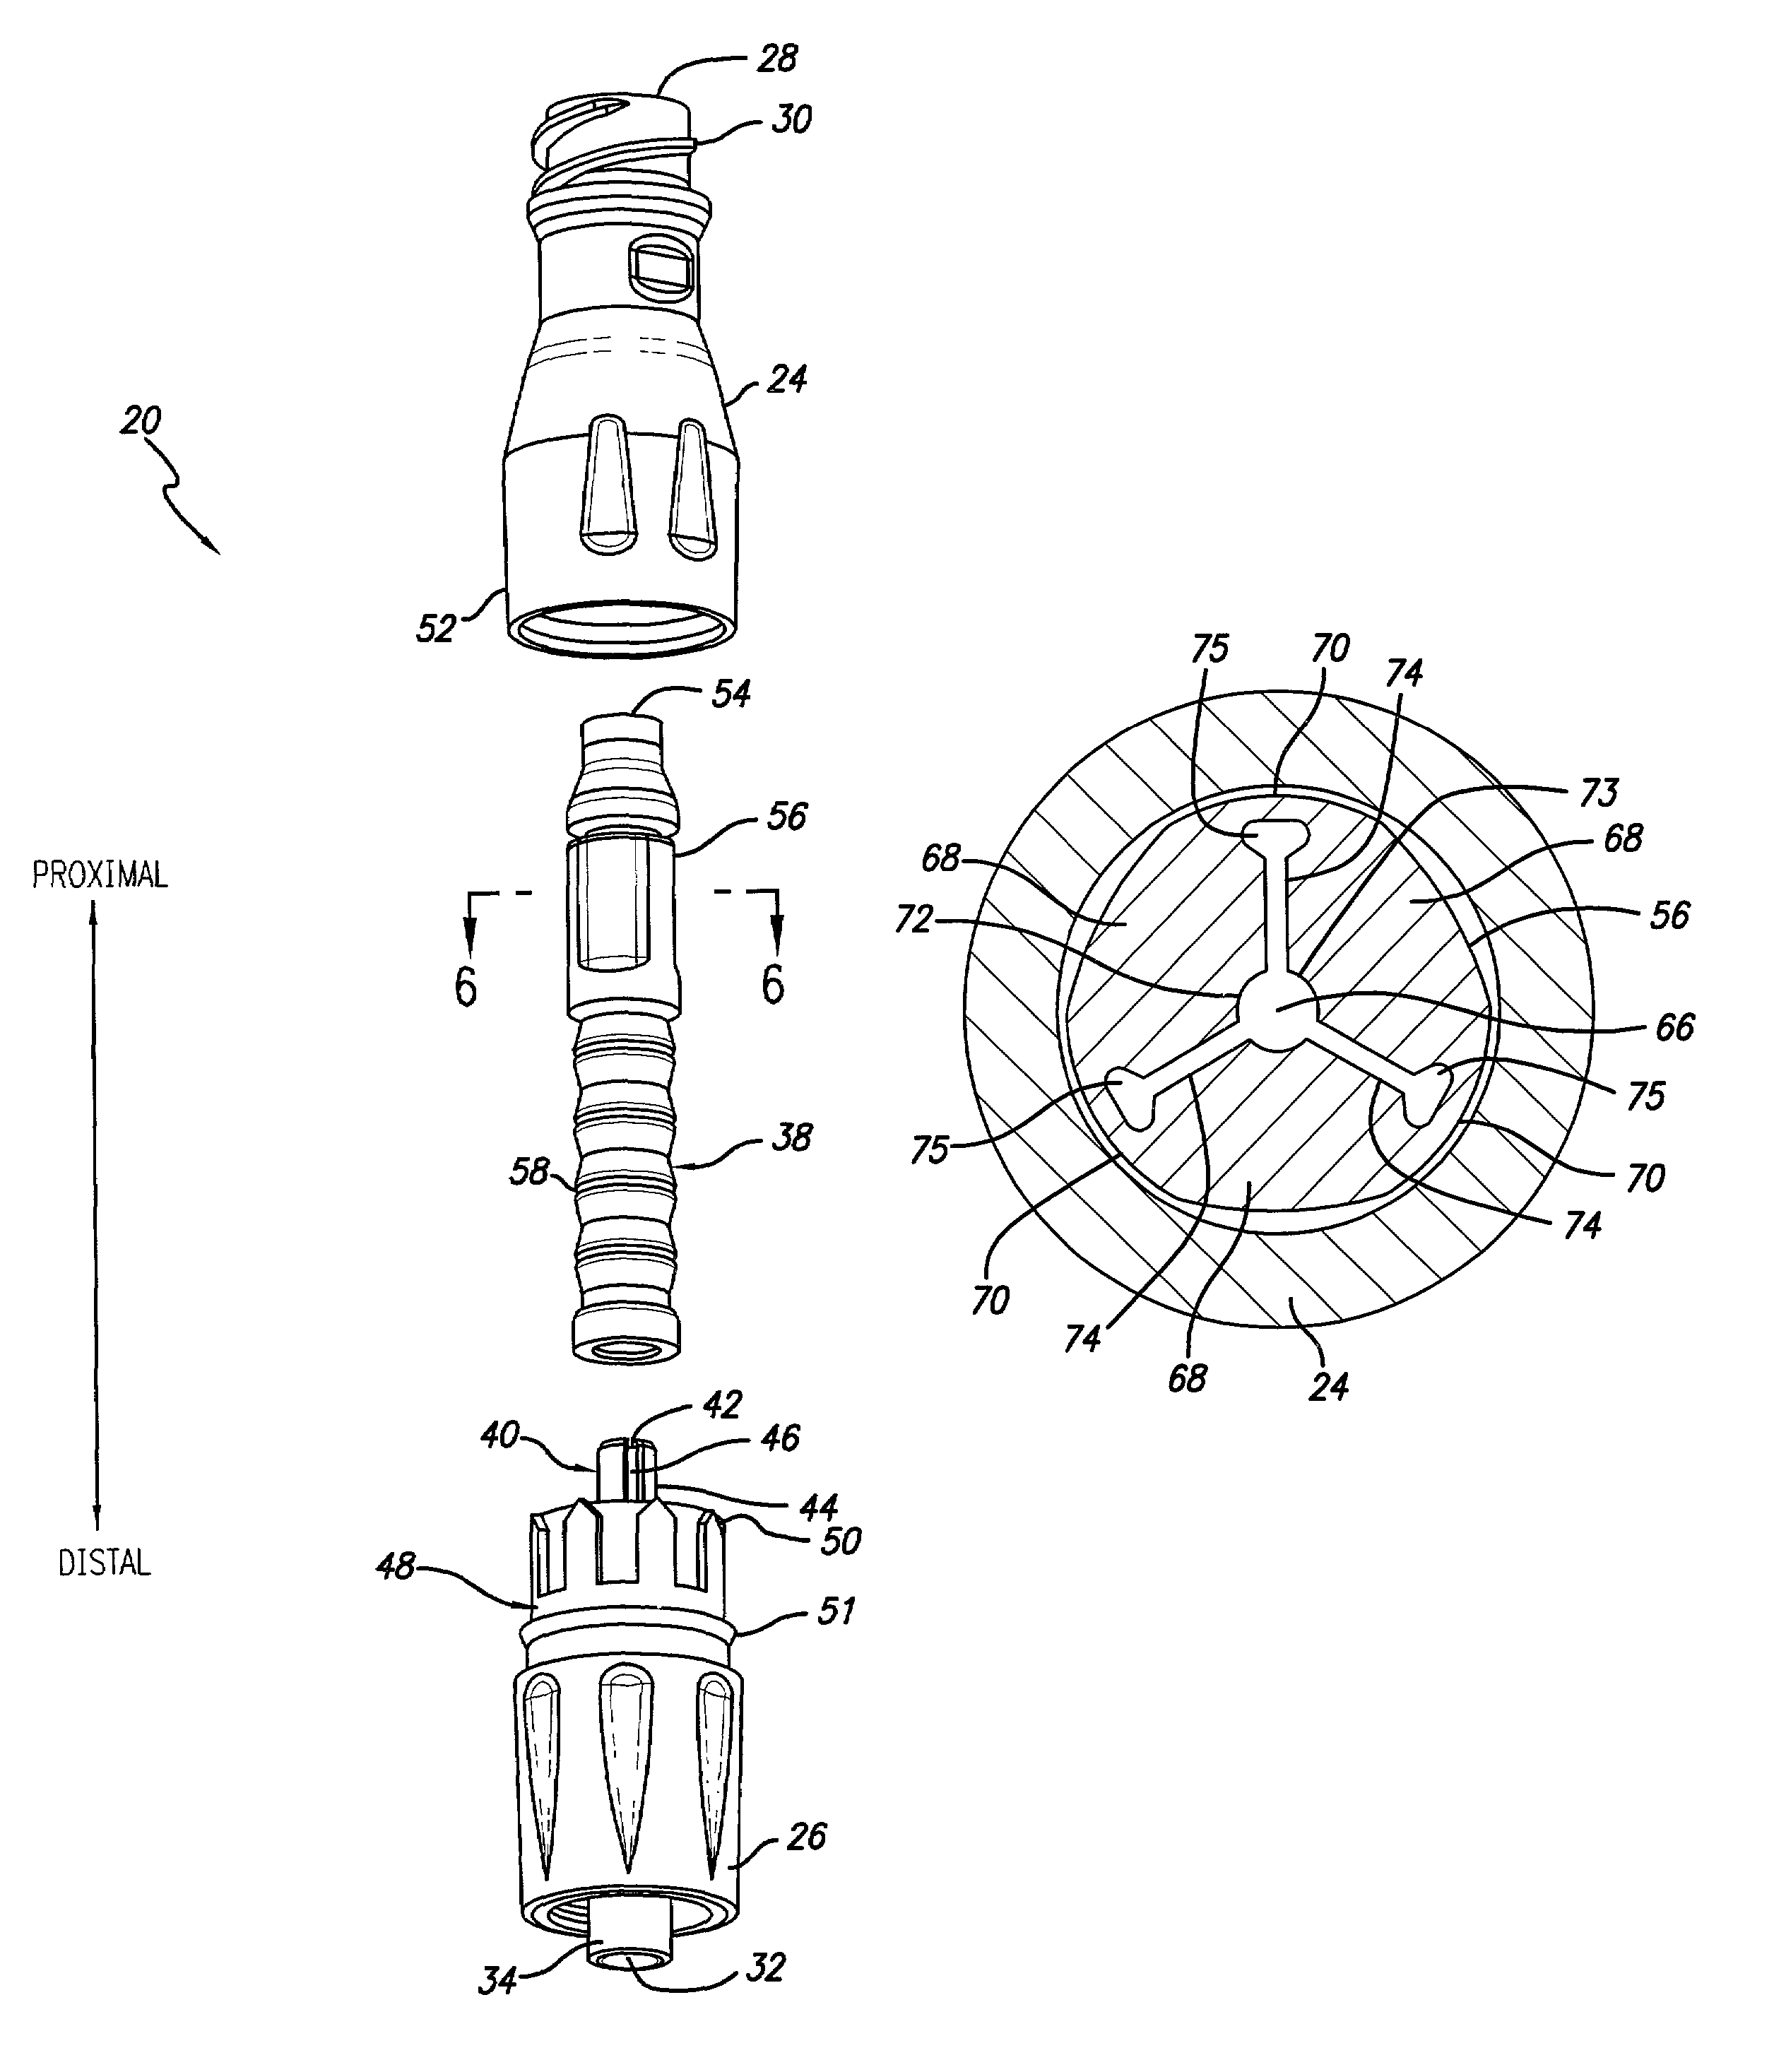 Needle-free medical connector with expandable valve mechanism and method of fluid flow control